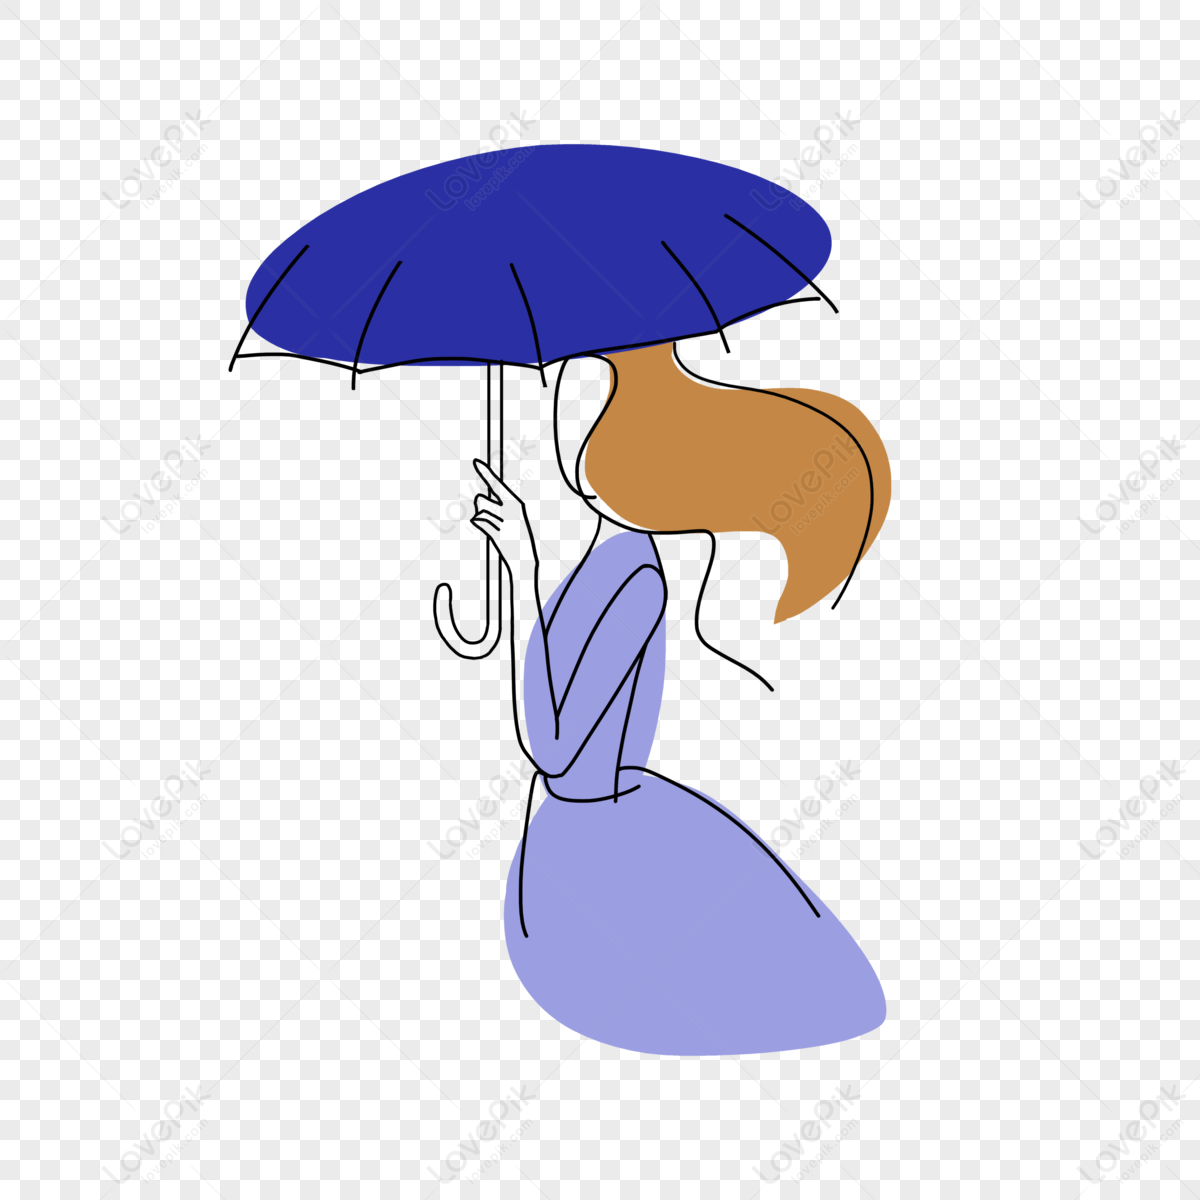 How to draw an Umbrella Drawing easy || Umbrella Drawing with Rain 🌧️ step  by step || Simple Drawing - YouTube